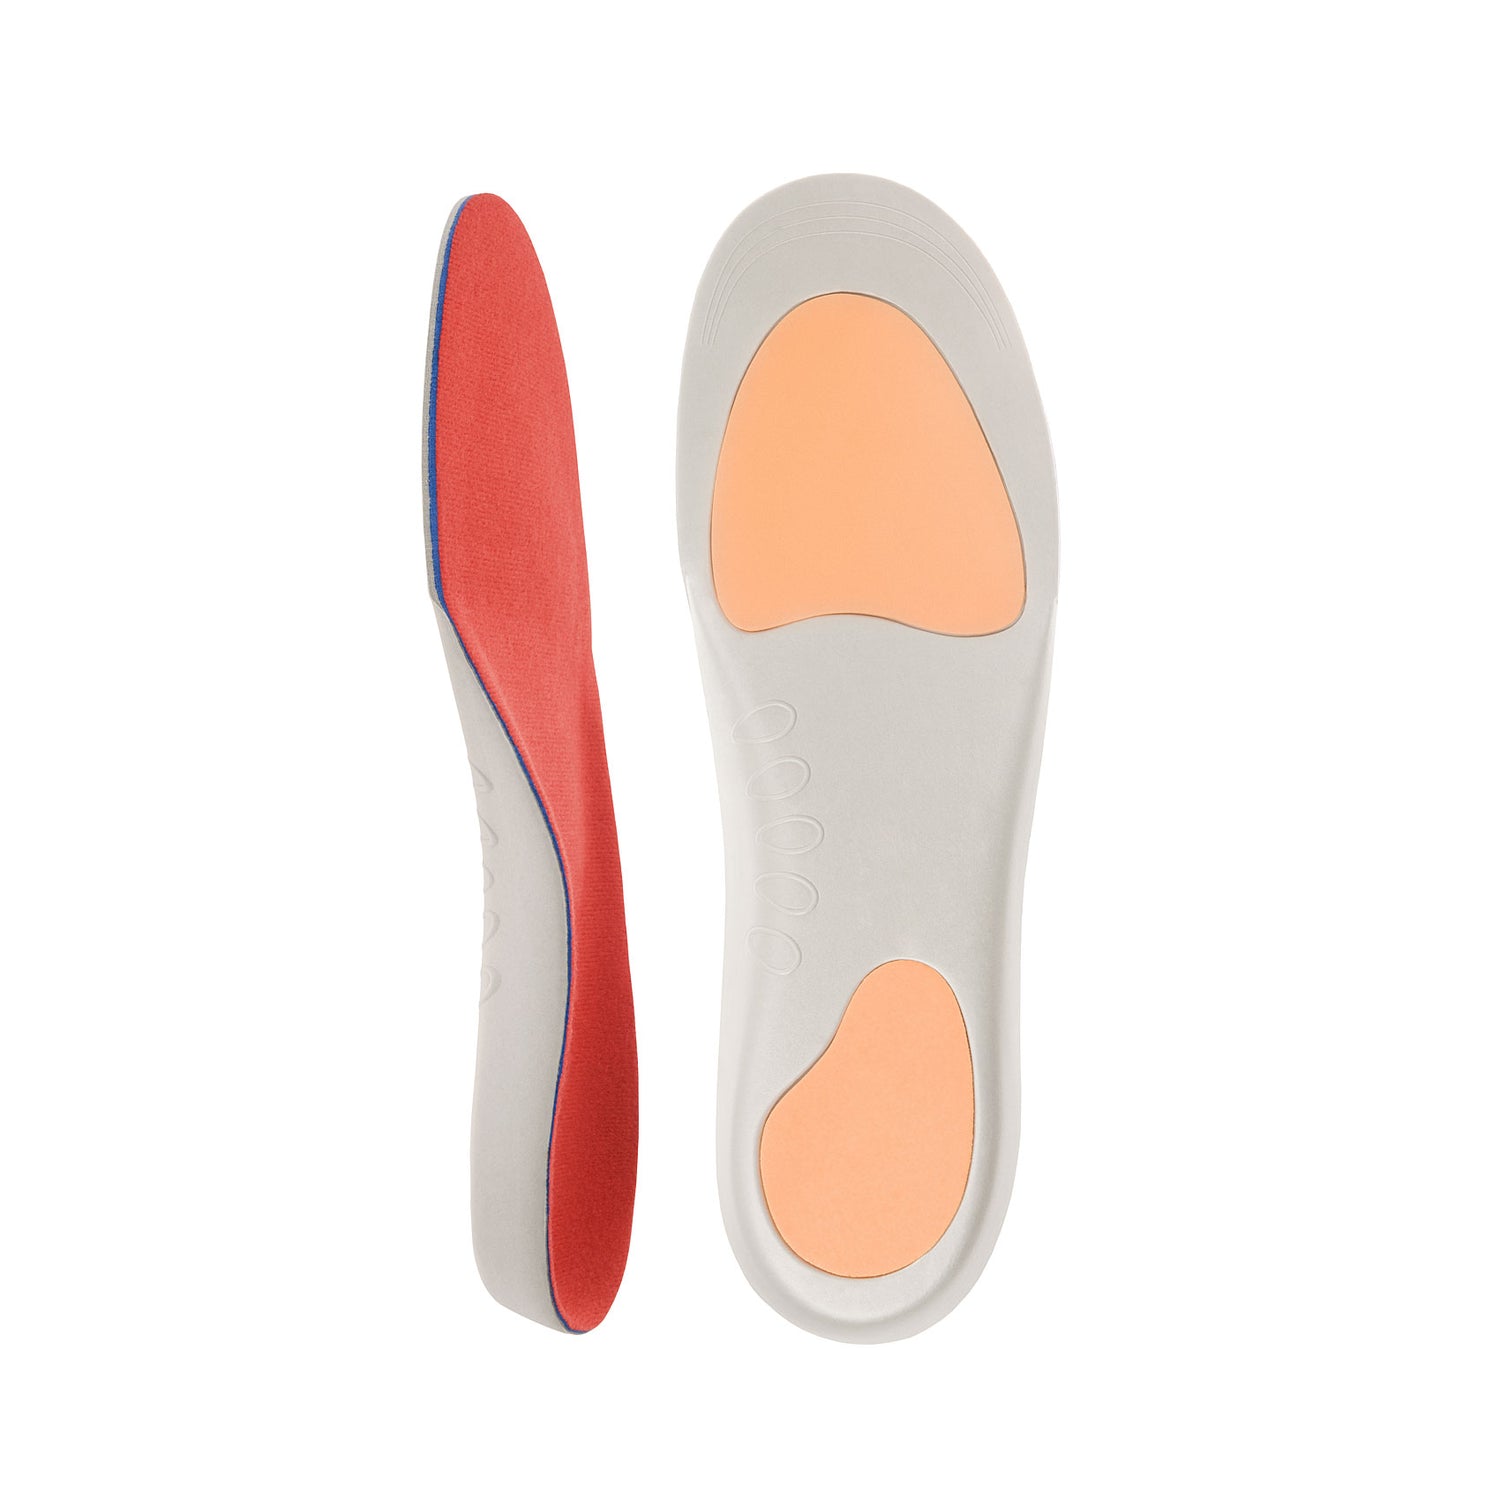 DJMed Orthotic - Shoe Insoles - Womens 7-8.5